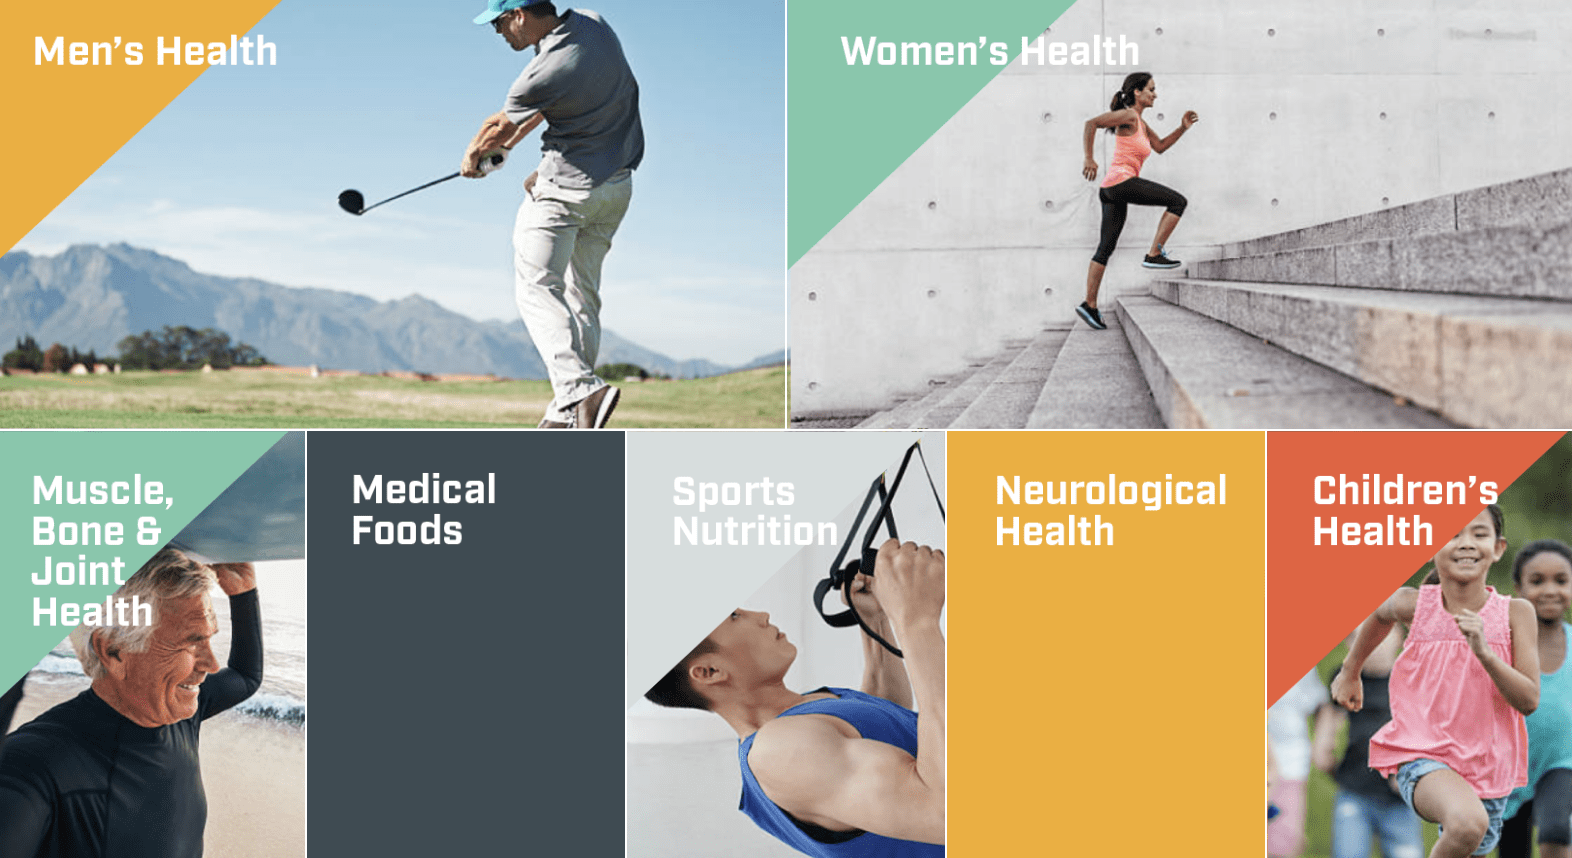 Promotional collage showcasing various health and wellness categories, including fitness, nutrition, and medical support for all ages and genders.